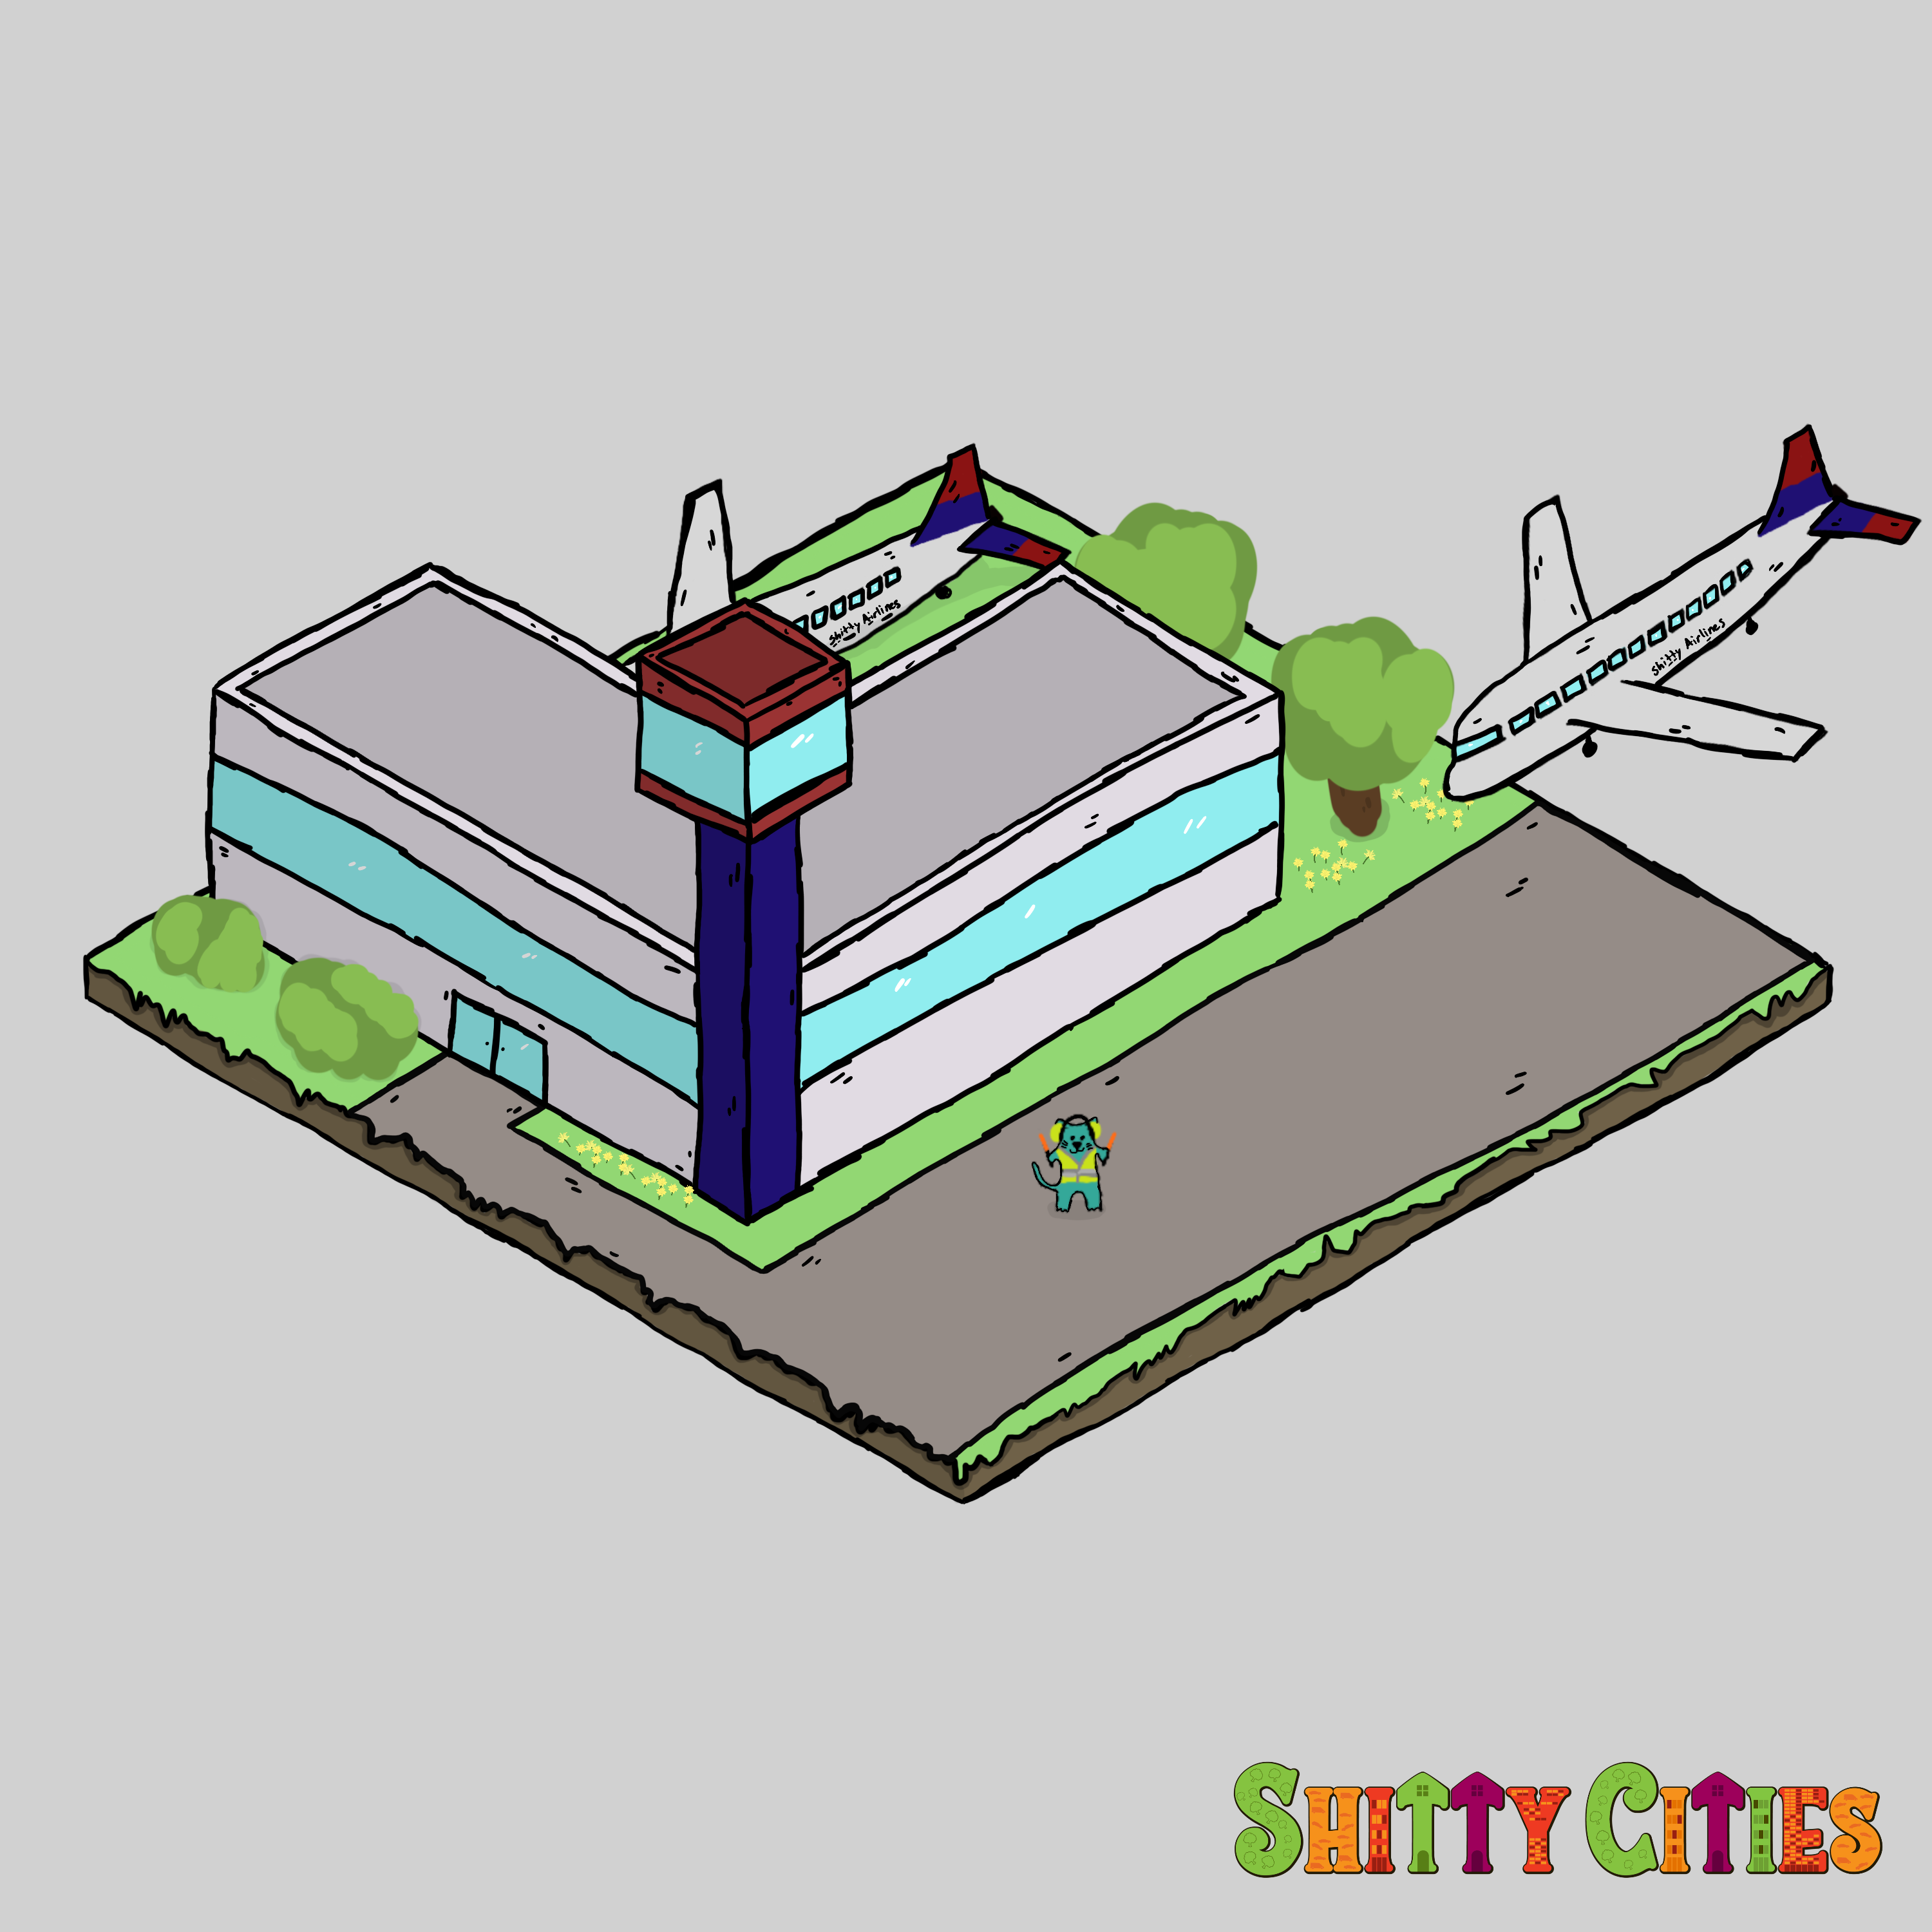 SCB13 - Airport